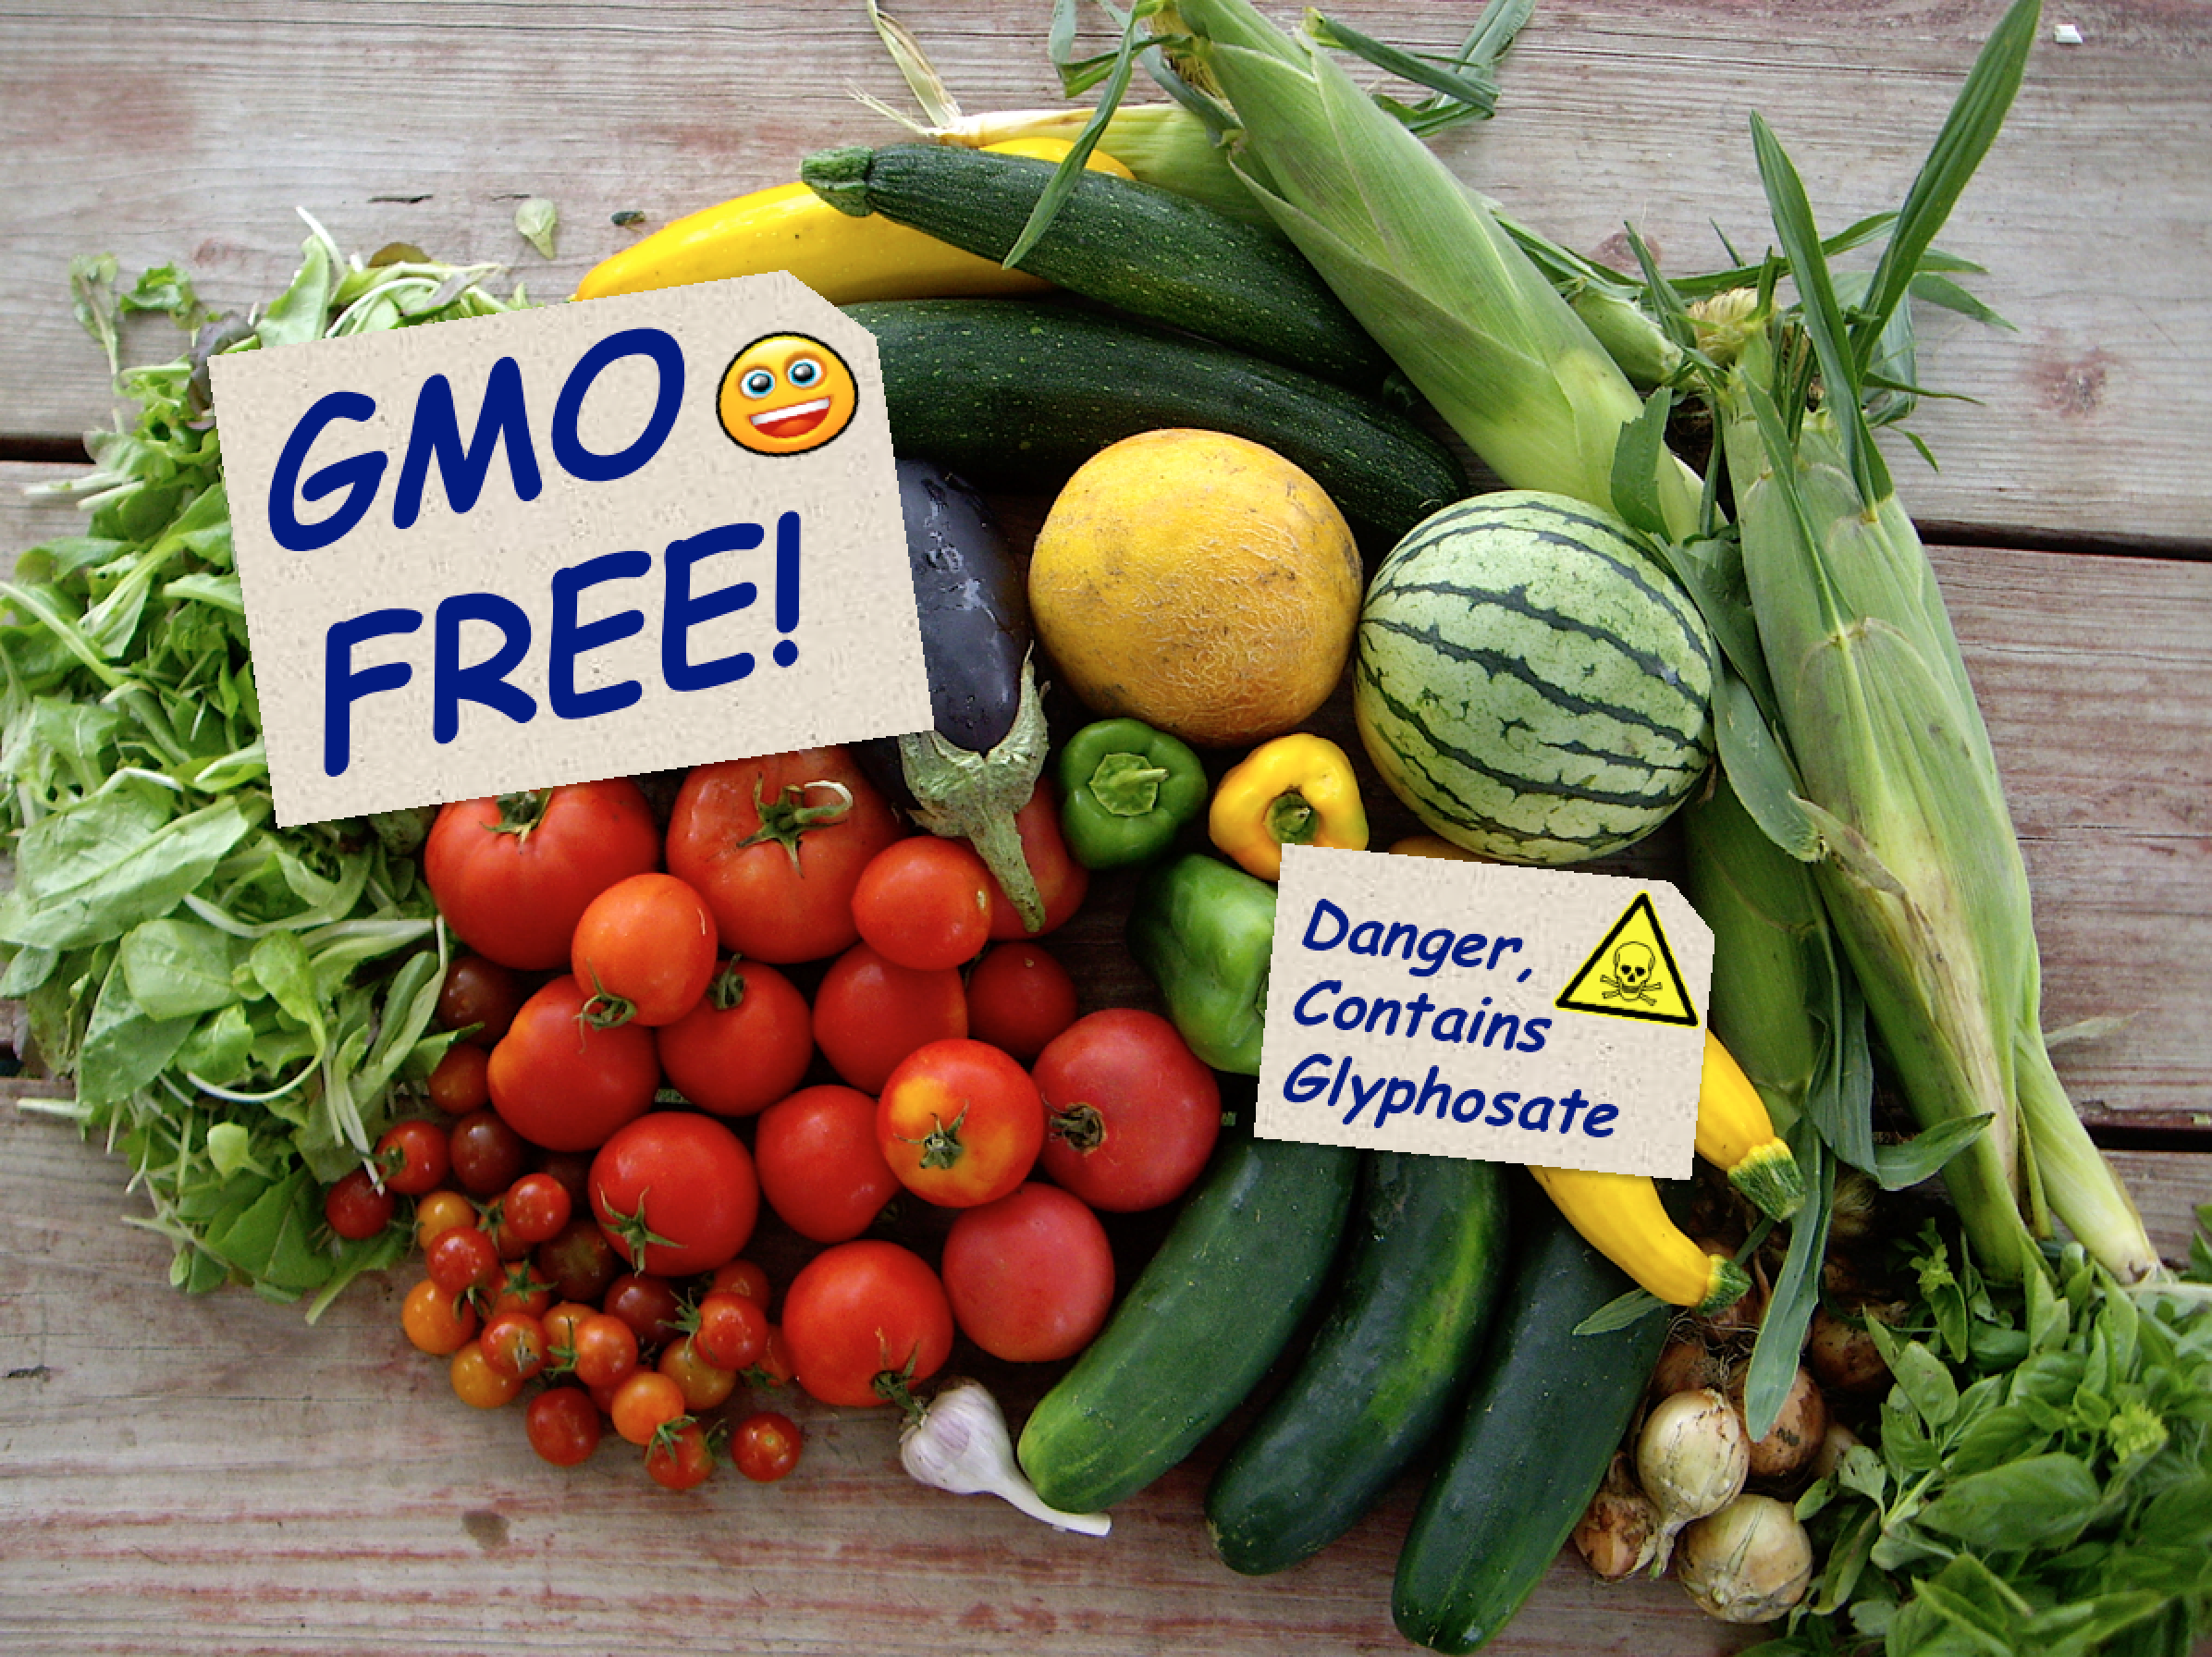 Is GMO-free Safe to Eat? NO! Many non-GMO foods harvested with ...